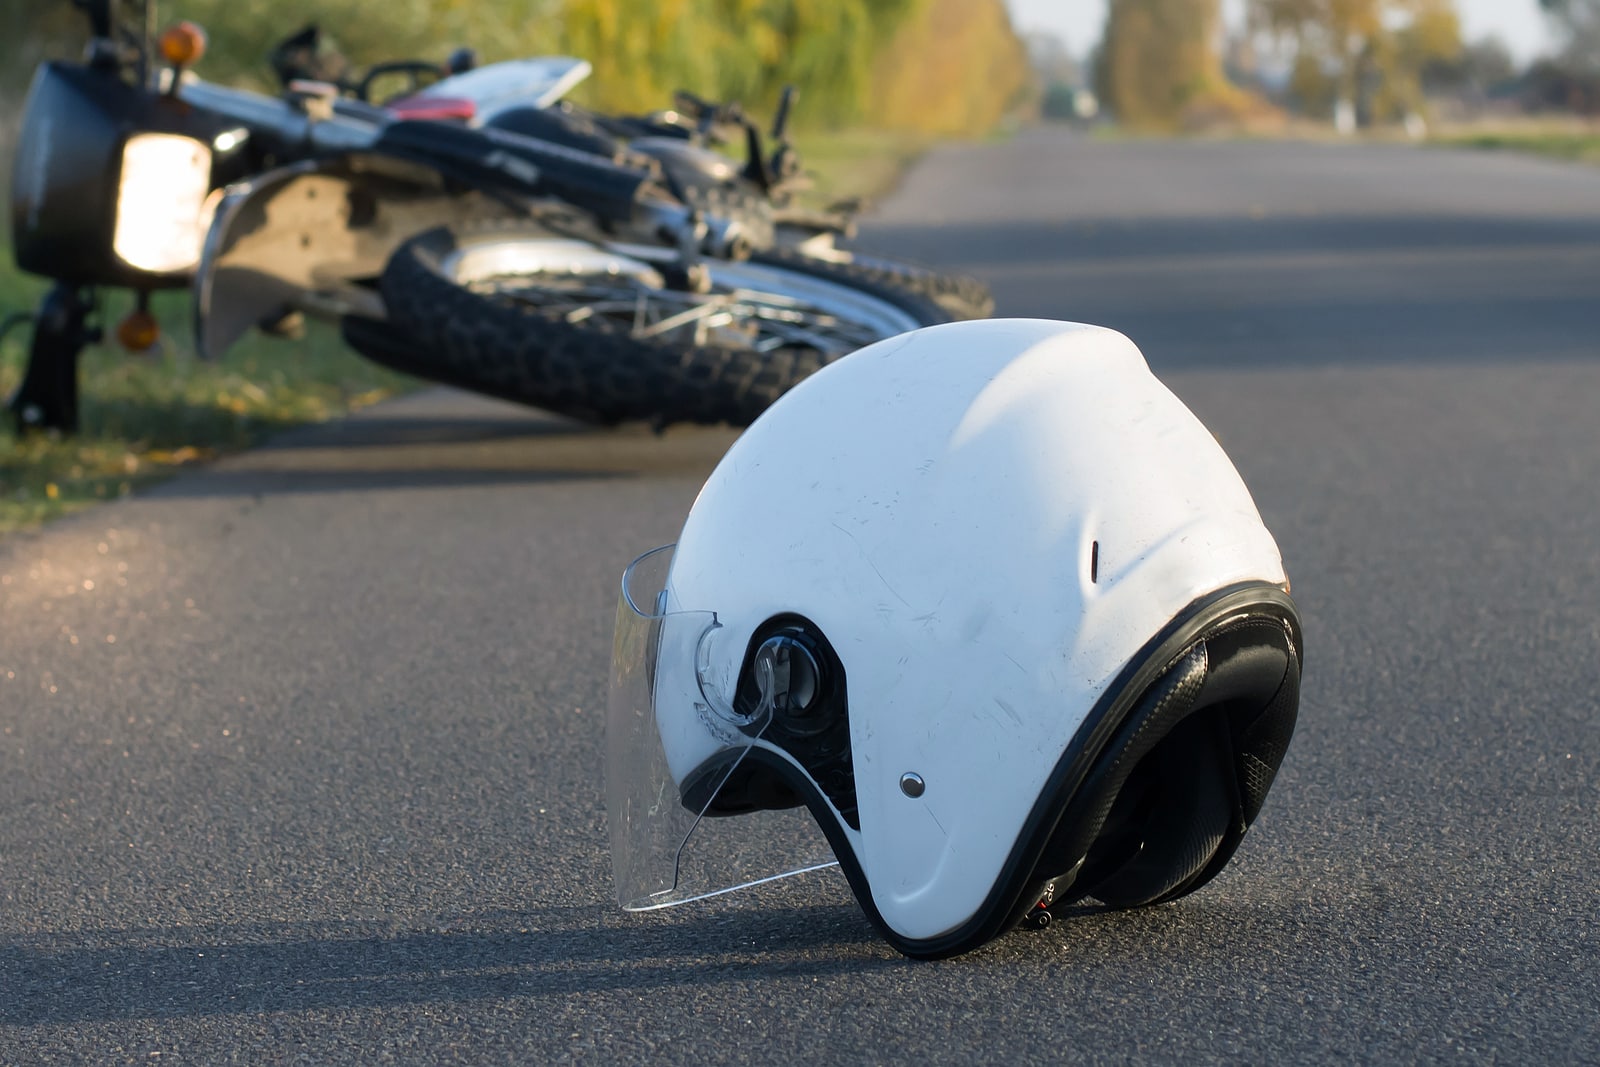 What Should You Know About the Legal Process Following a Motorcycle Accident in Ohio?